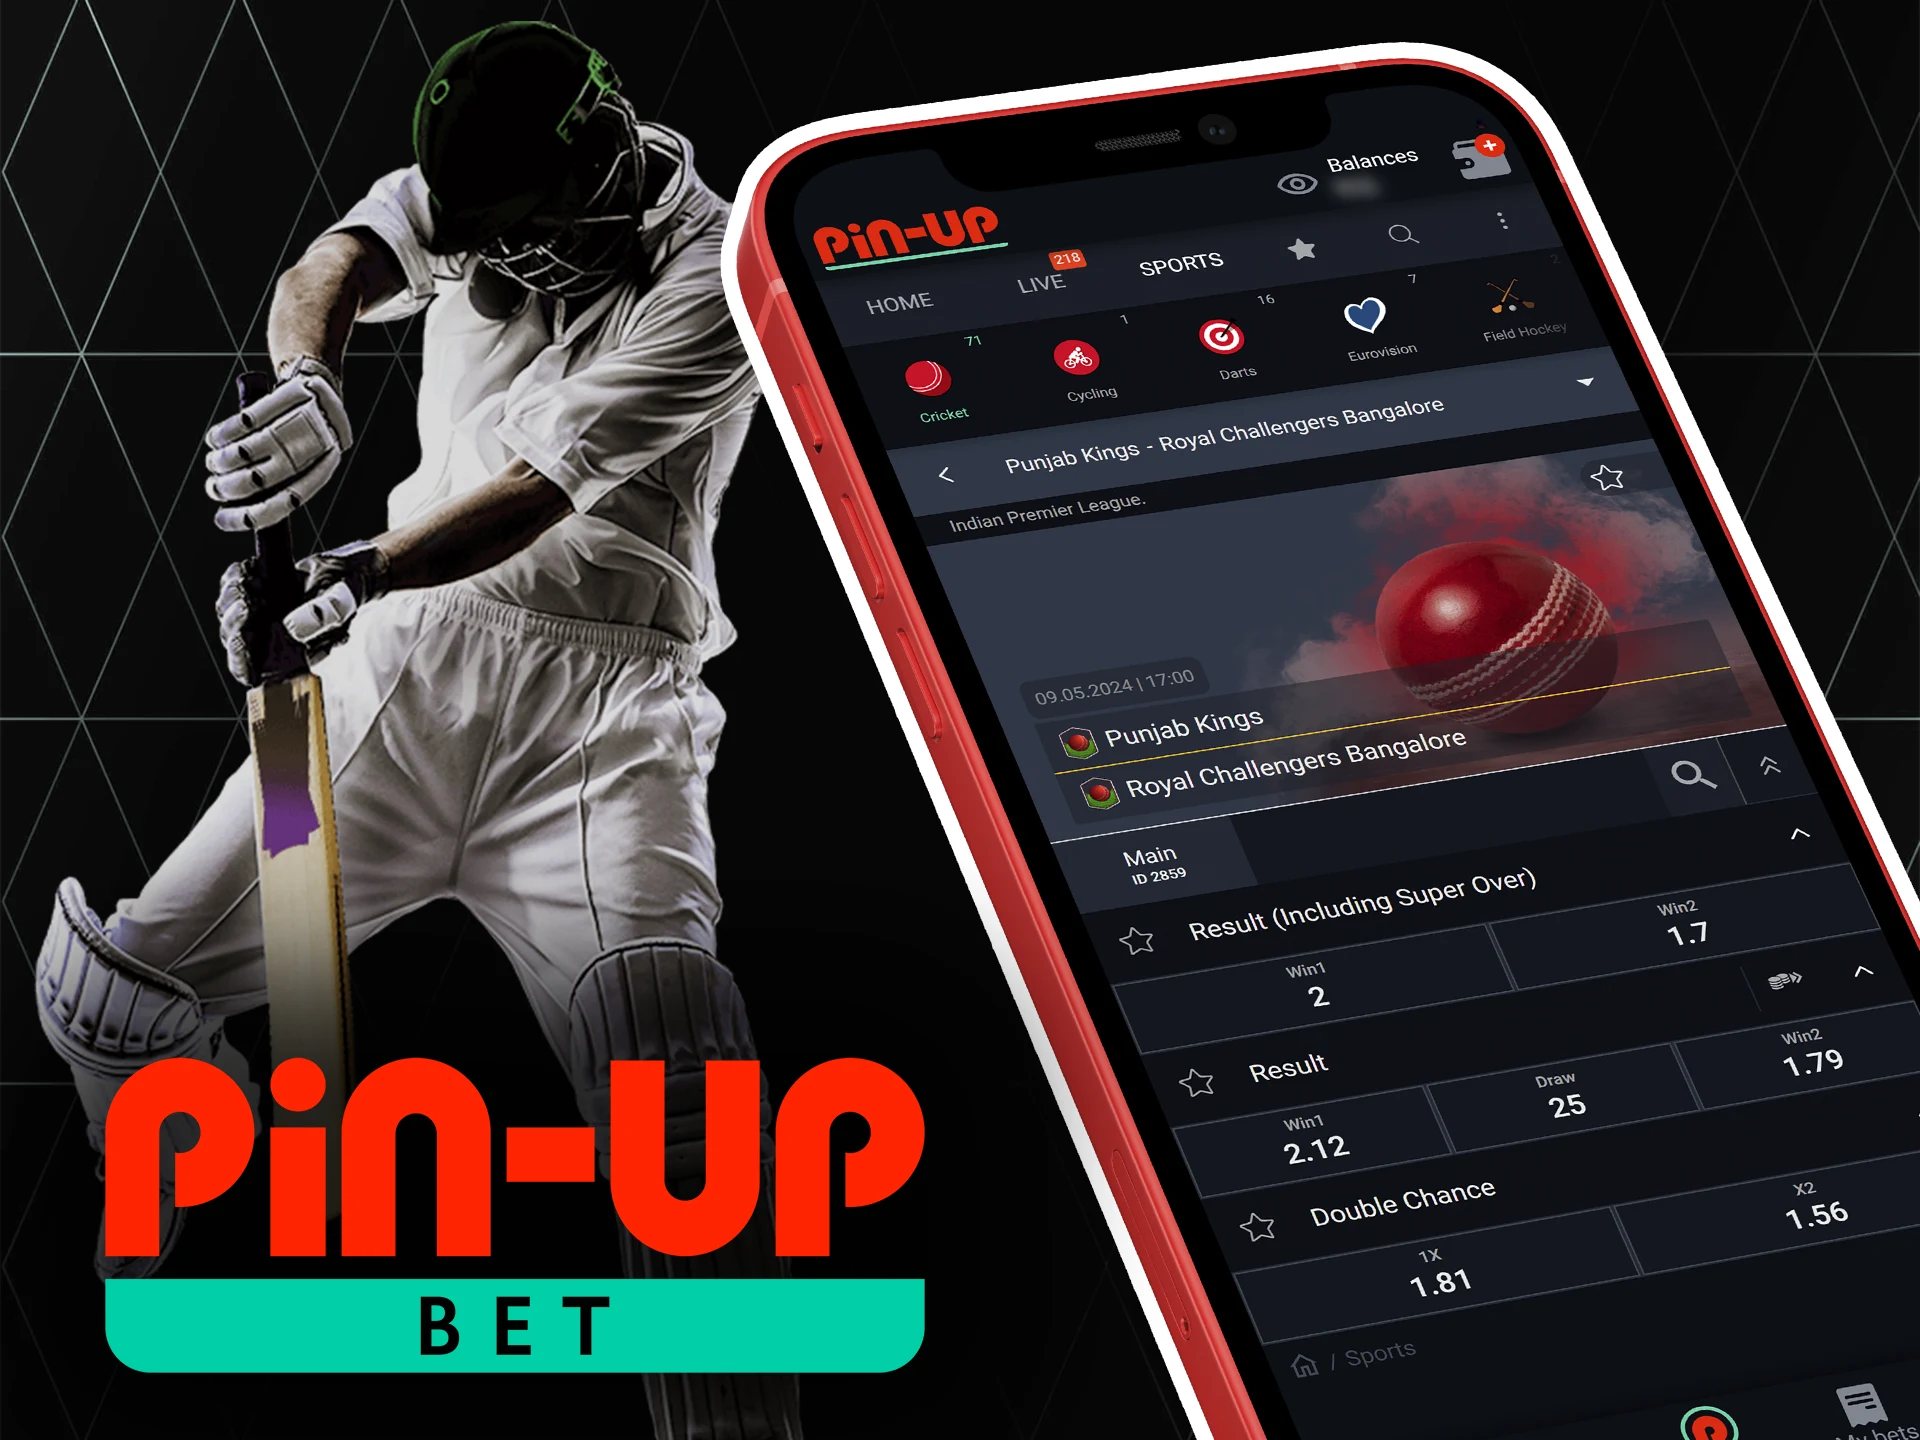 Launch the Pin-Up app and watch live cricket tournaments.